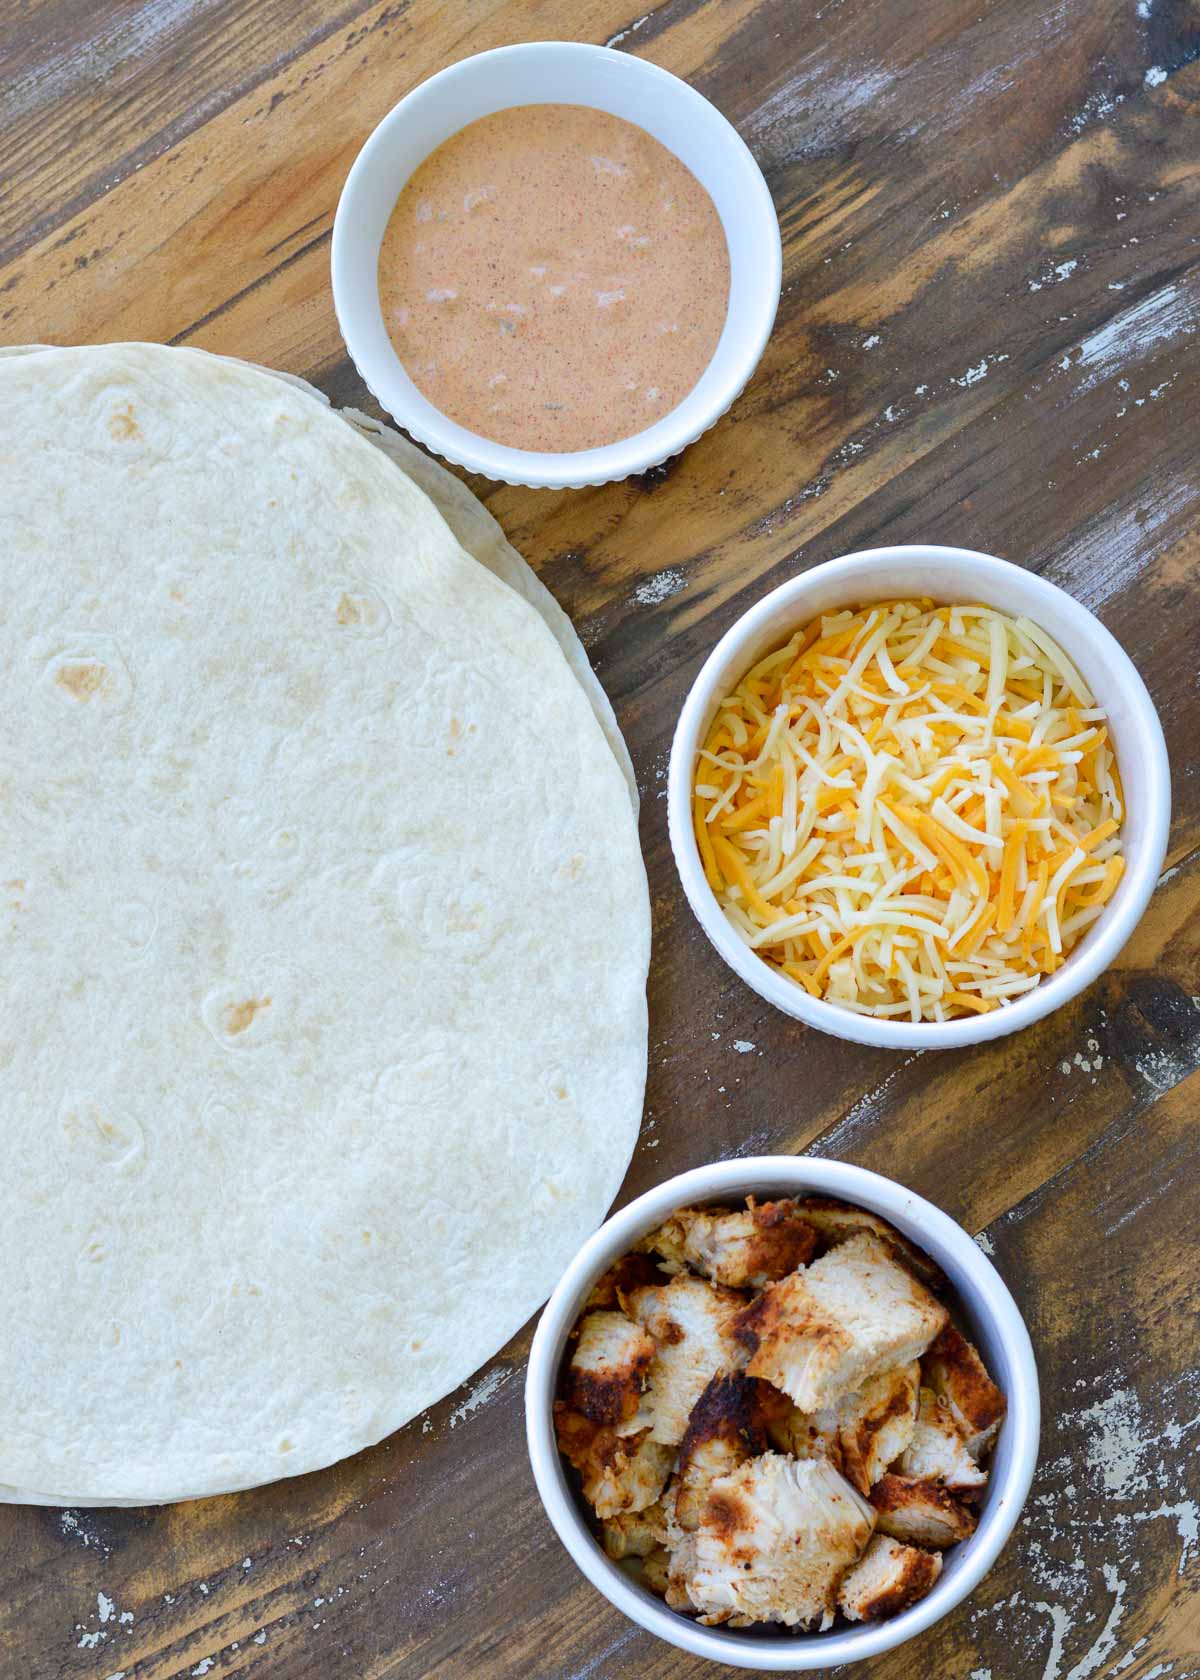 This easy recipe makes a Taco Bell Creamy Jalapeno Sauce copycat you'll want to put on everything! Perfect for quesadillas, tacos, nachos, and more!